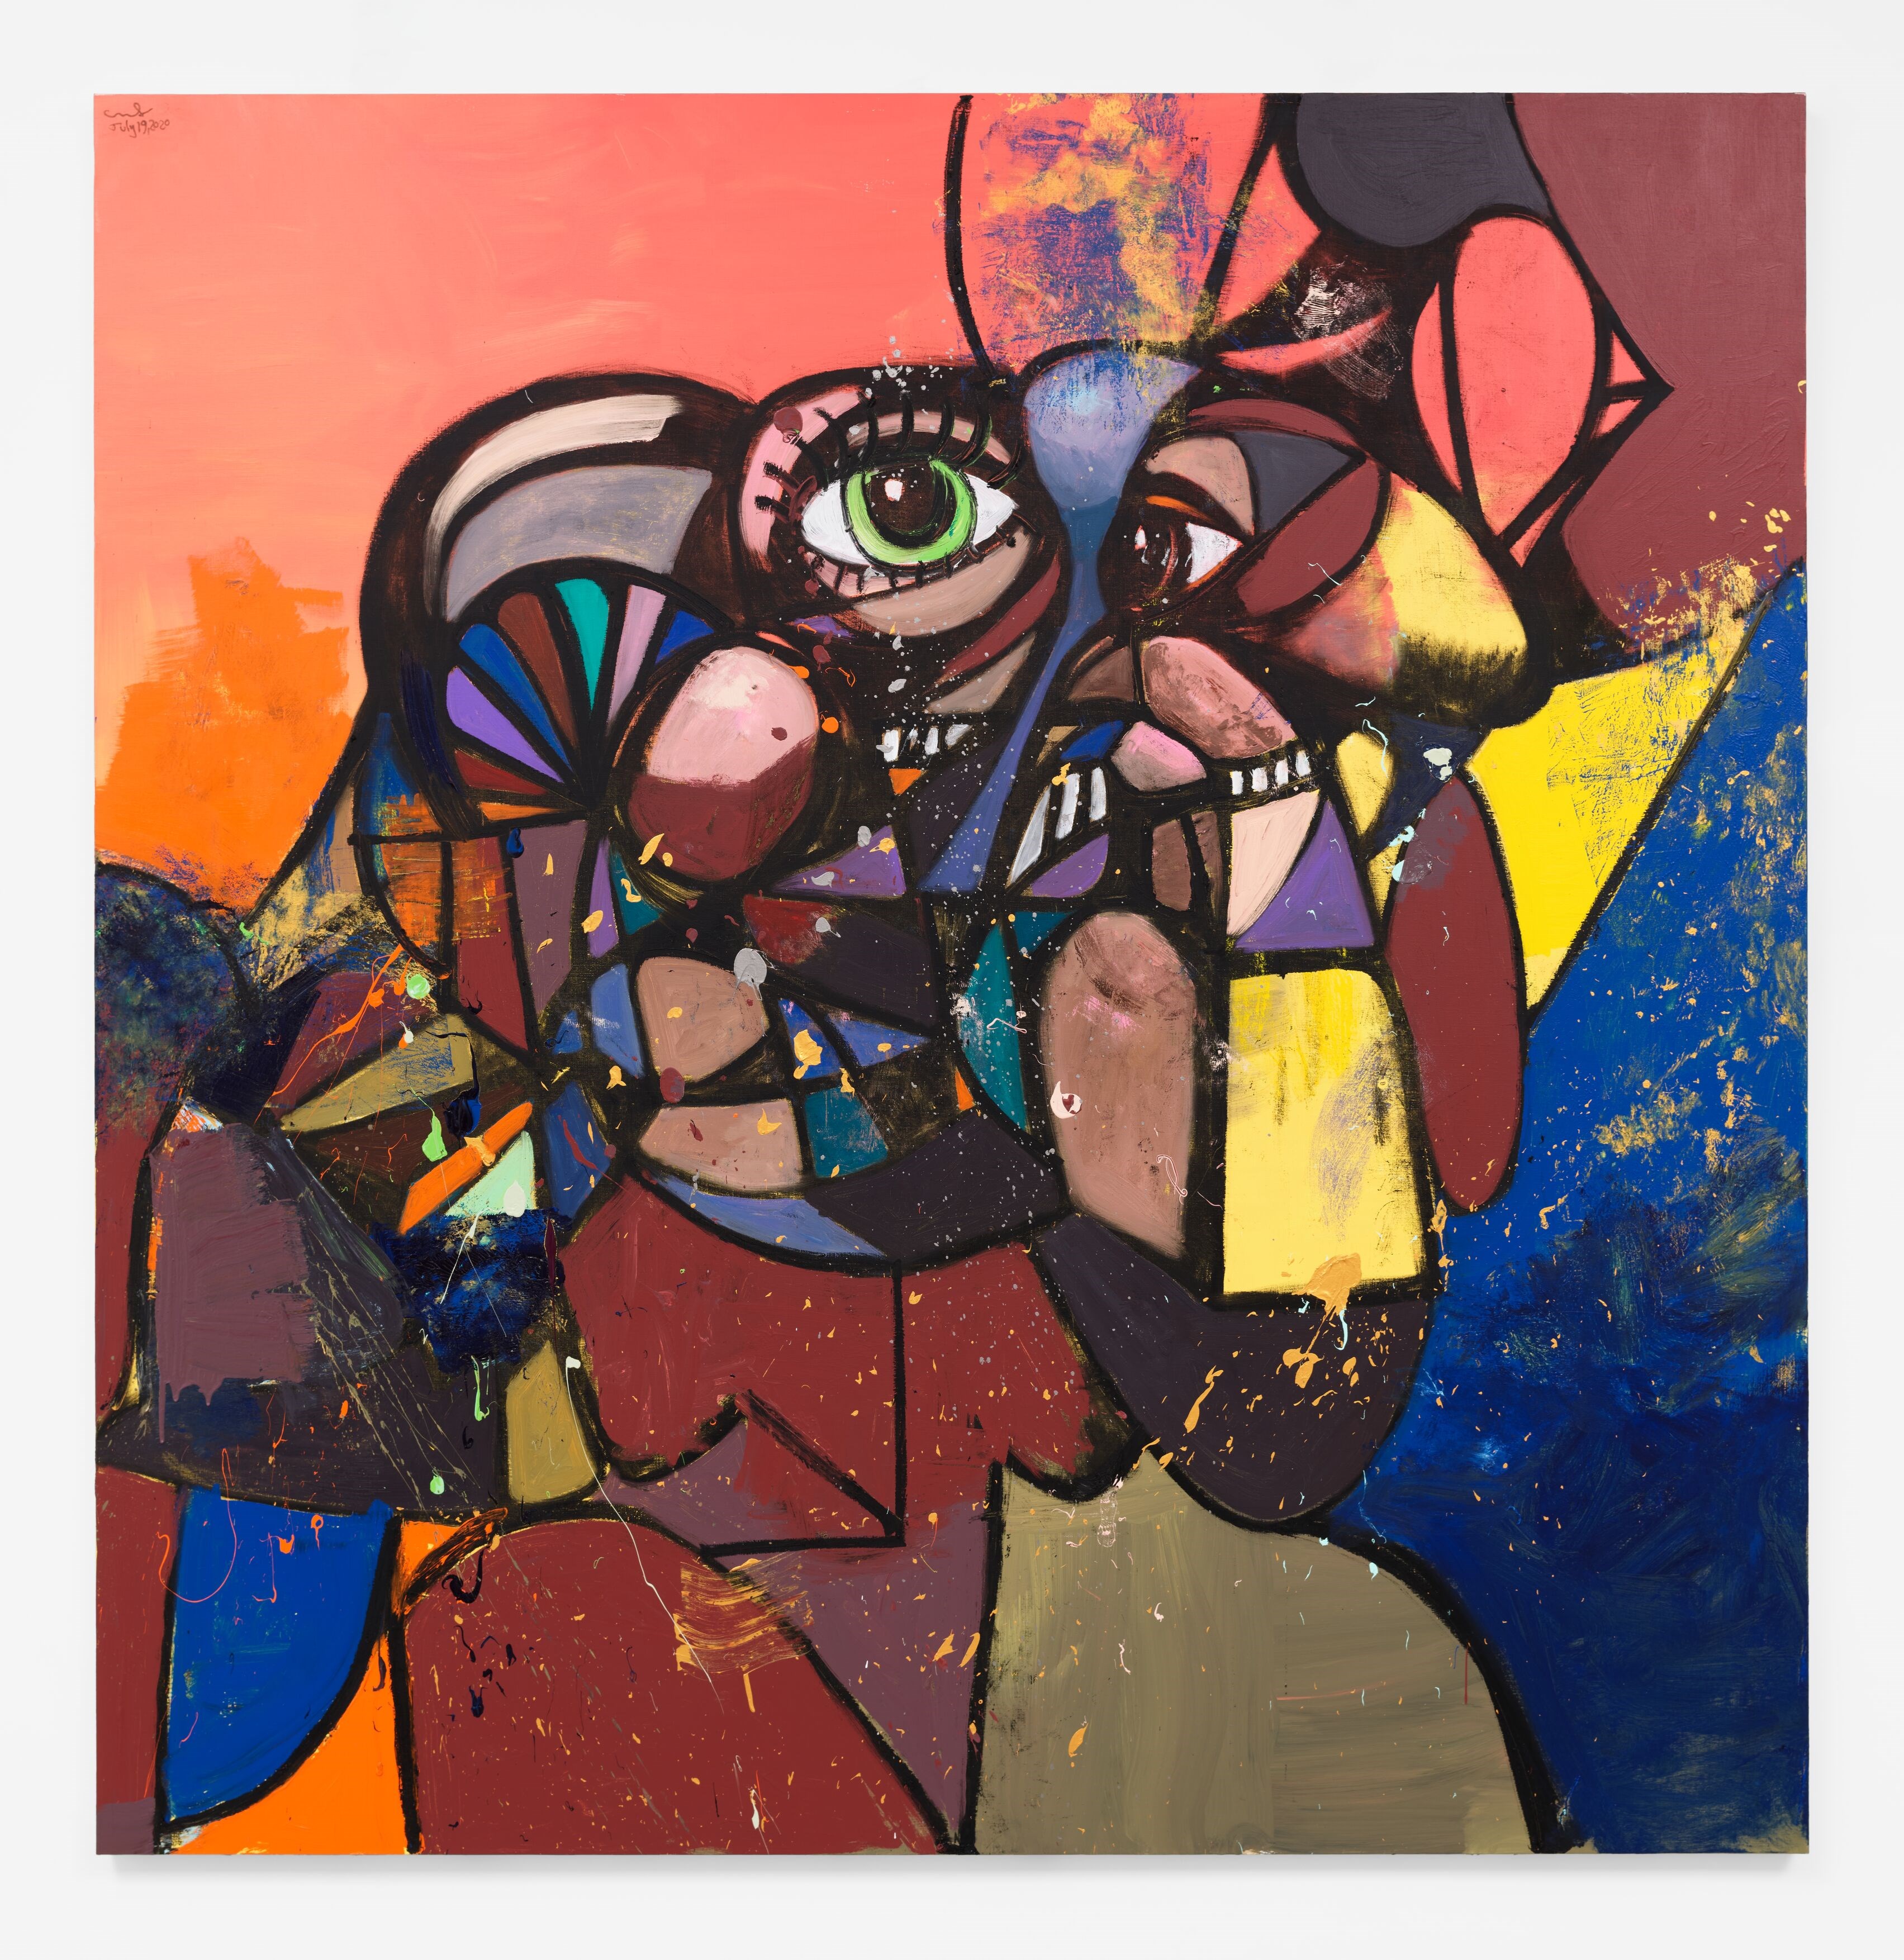 The New Normal, 2020 by George Condo | Ocula